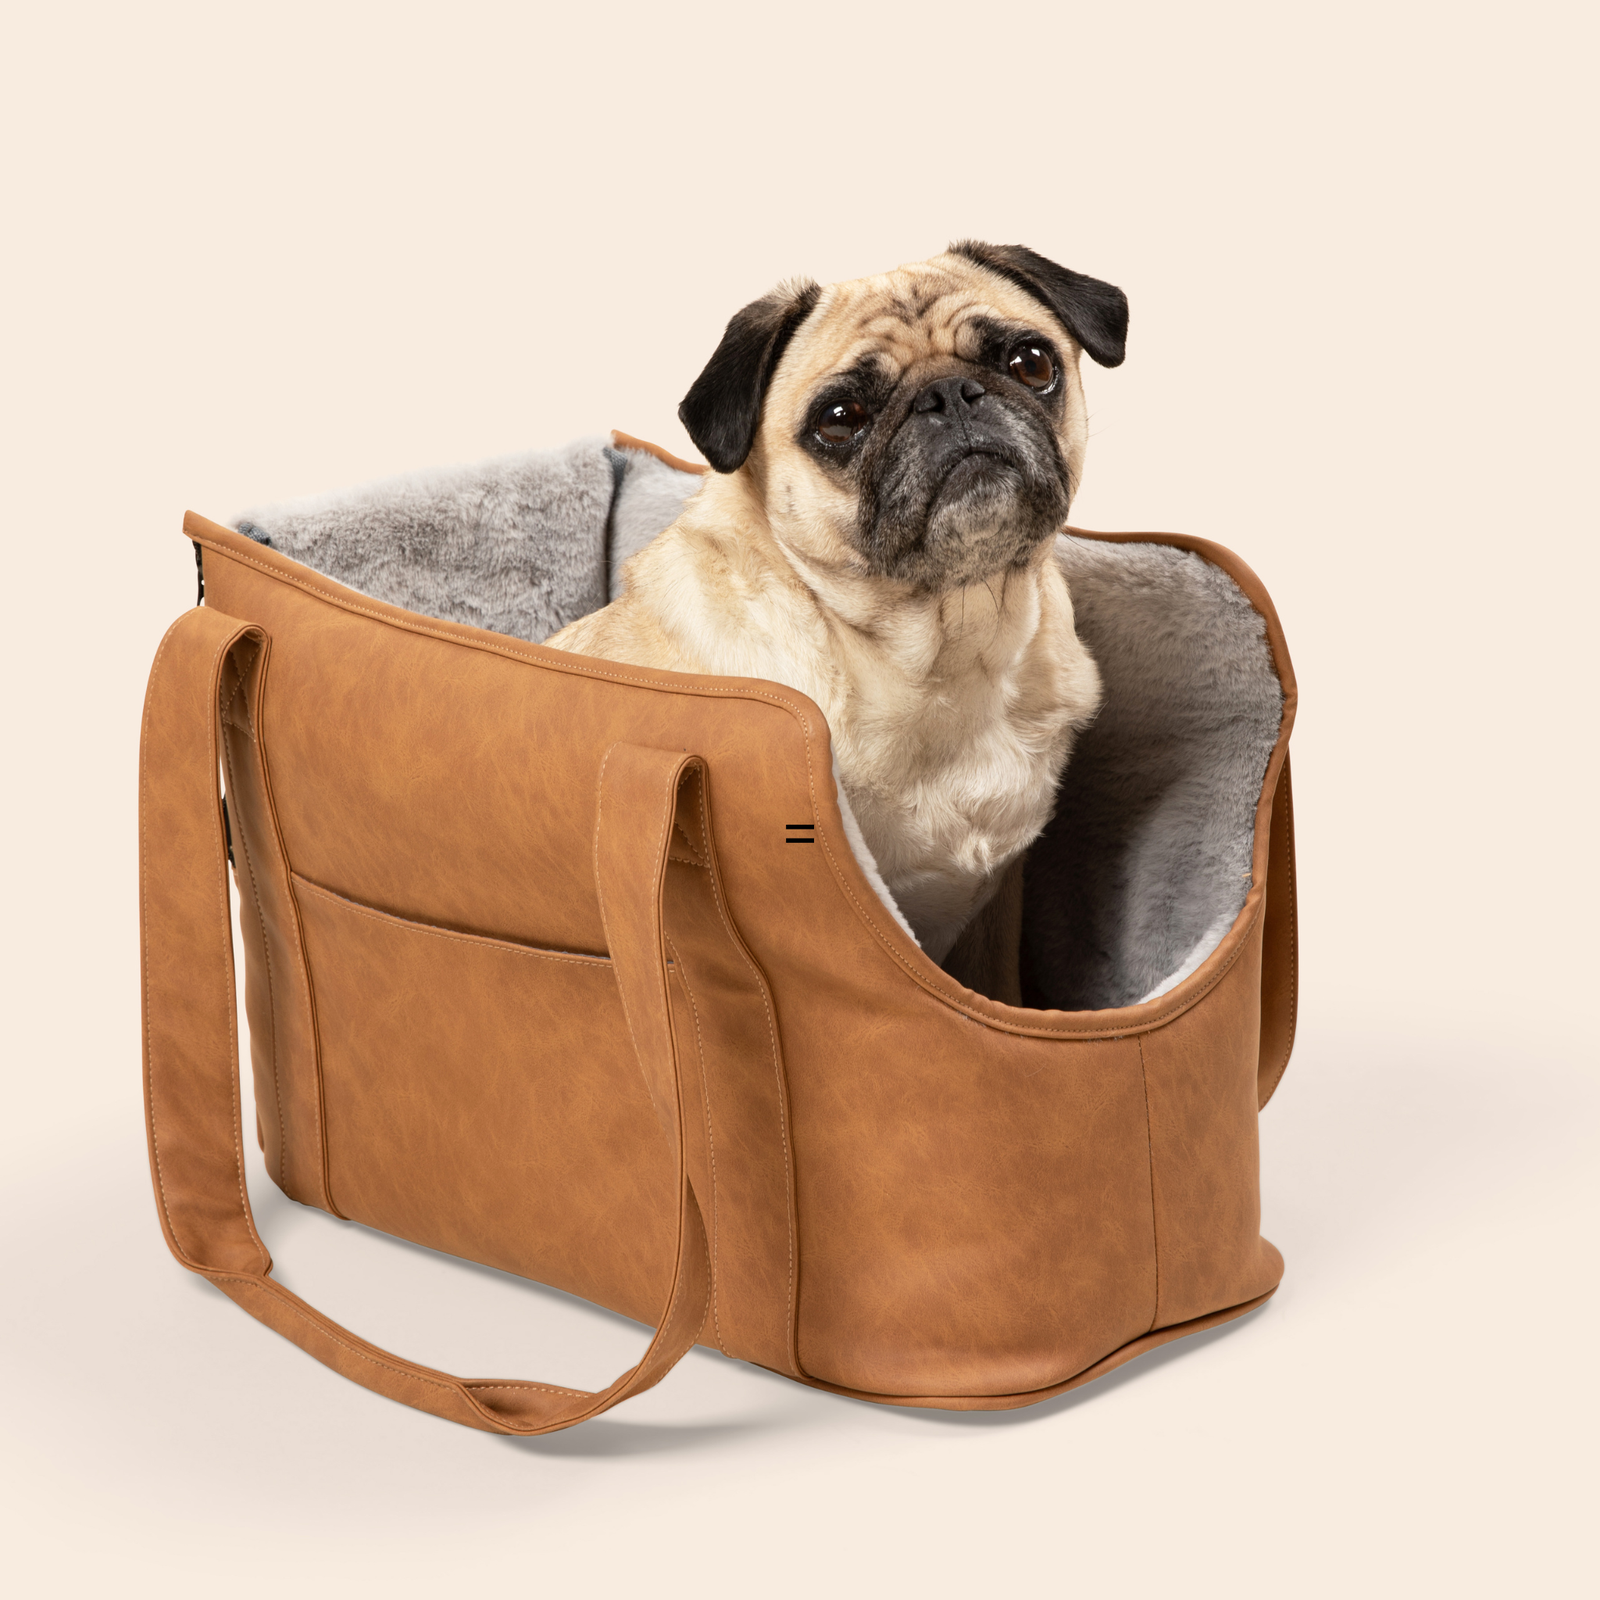 Unique Designer Travel Bag for a 7.5 lbs dog that matches other